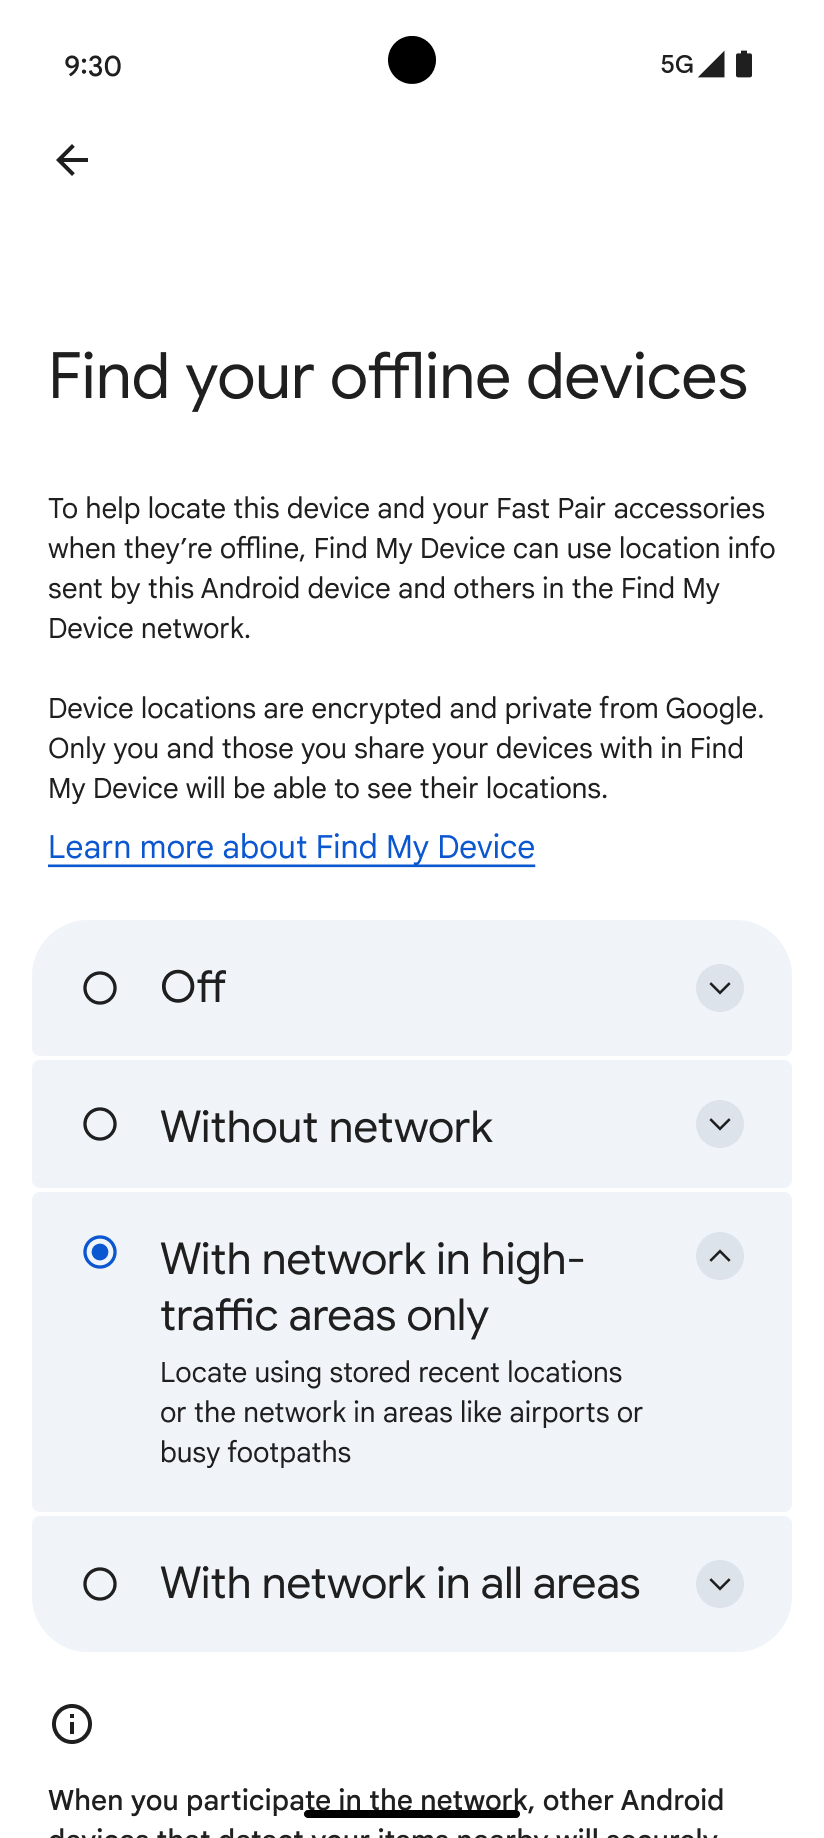 This images shows the options when you tap the find your offline devices page on your device